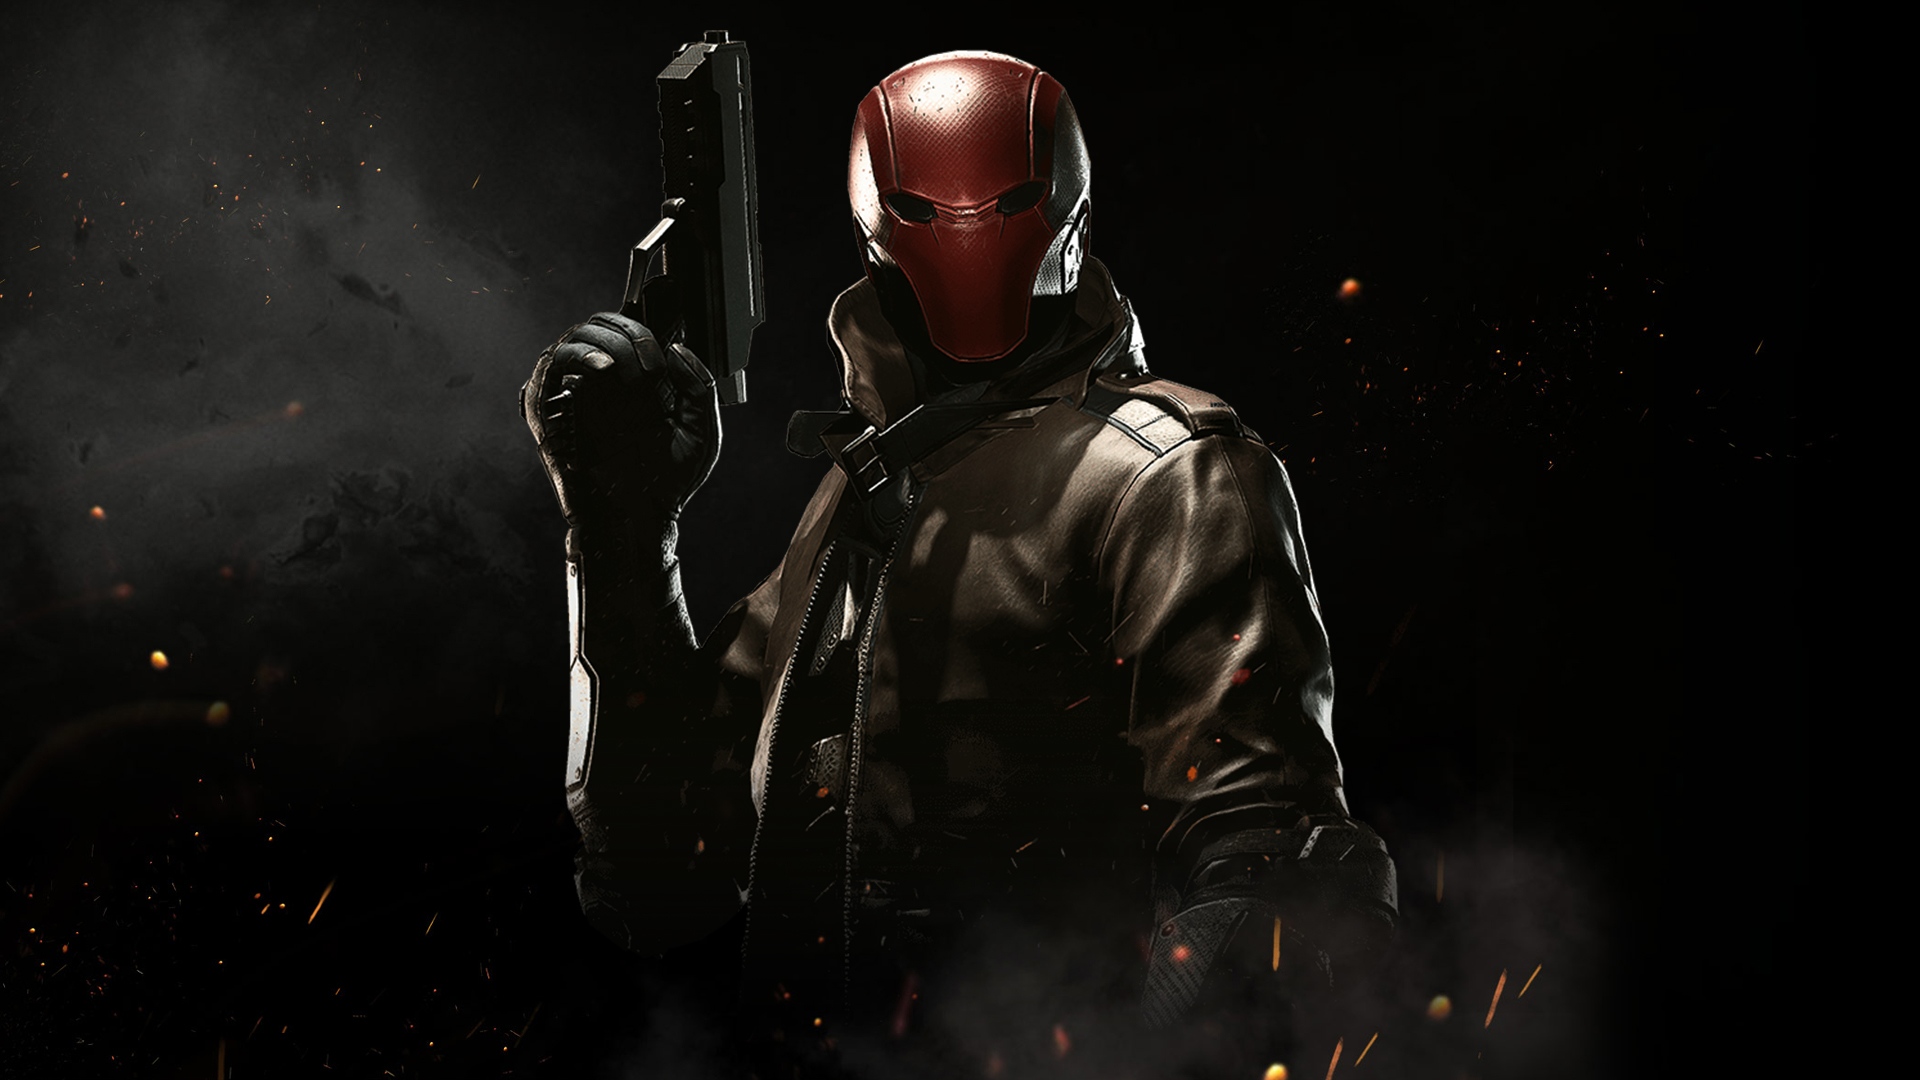 jason todd, video game, injustice 2, red hood, injustice High Definition image